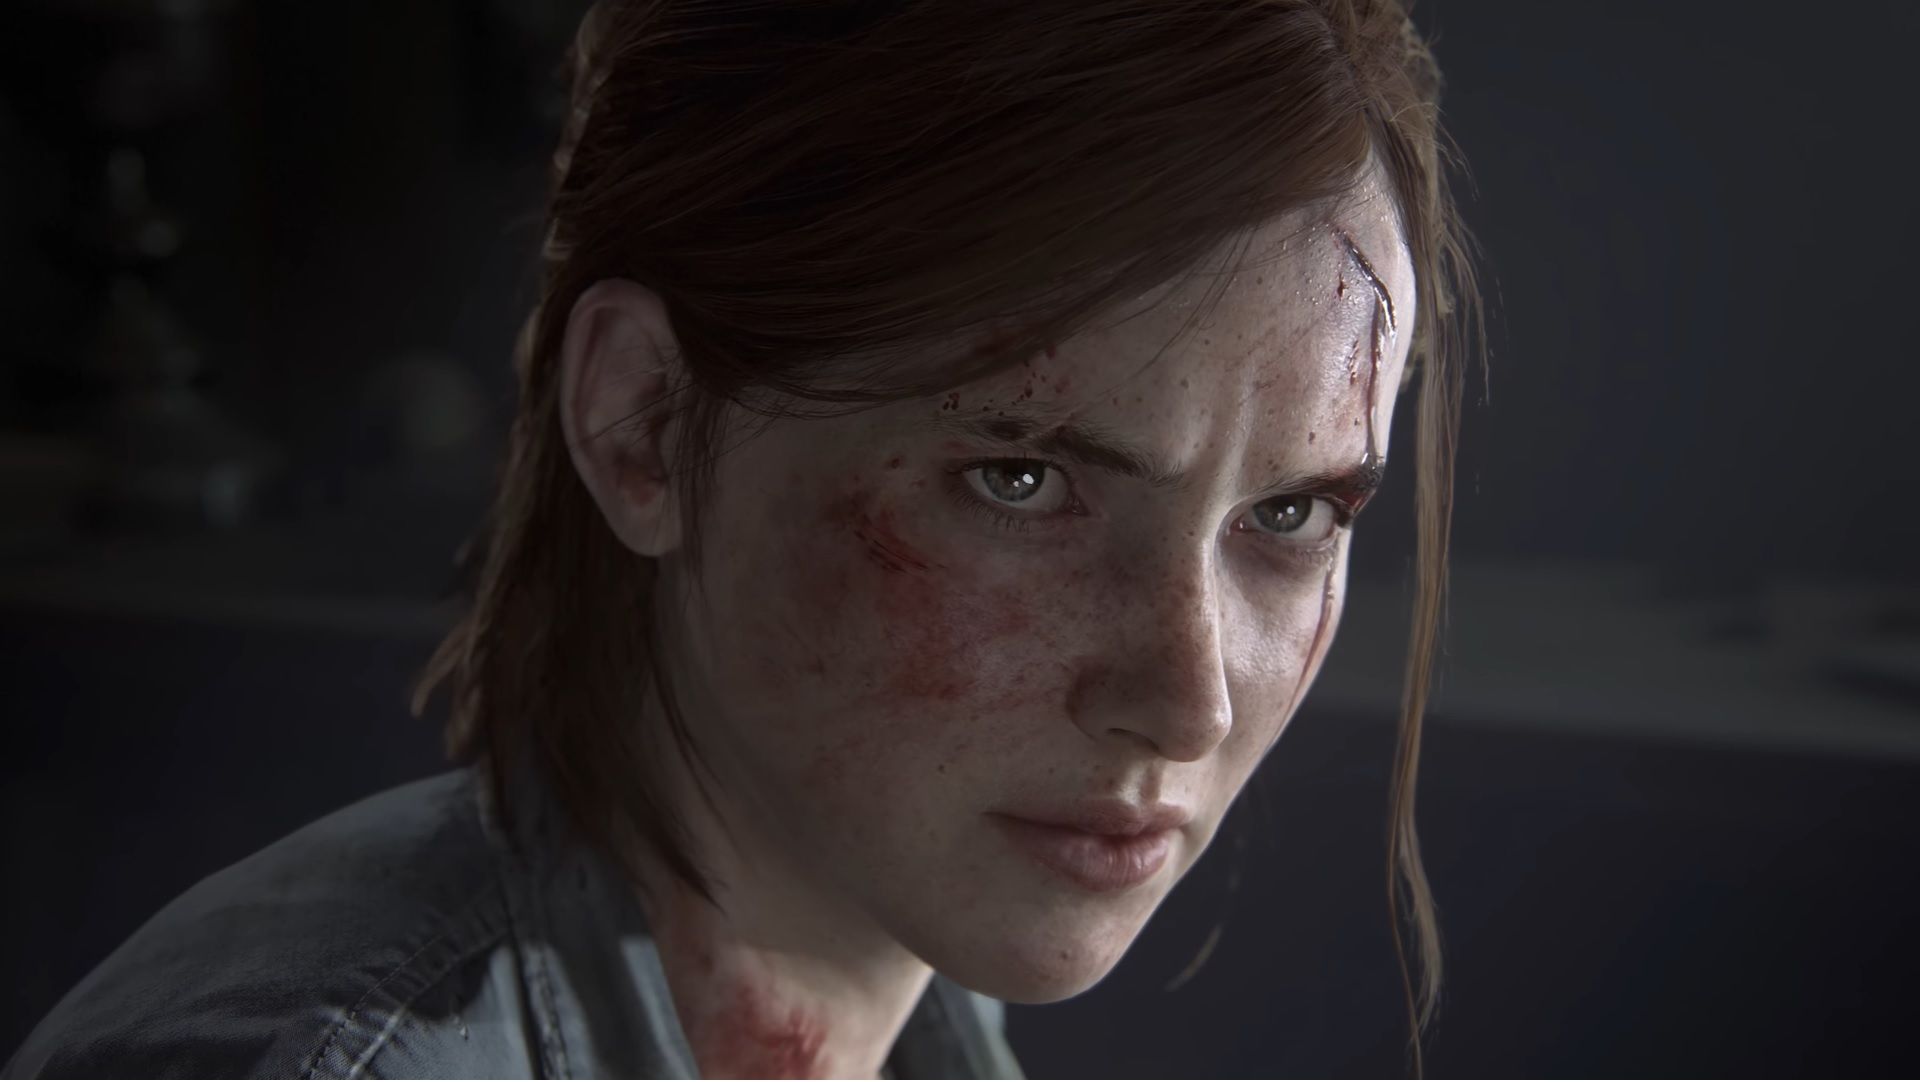 Last of Us boss responds to possibility of Last of Us Part 3